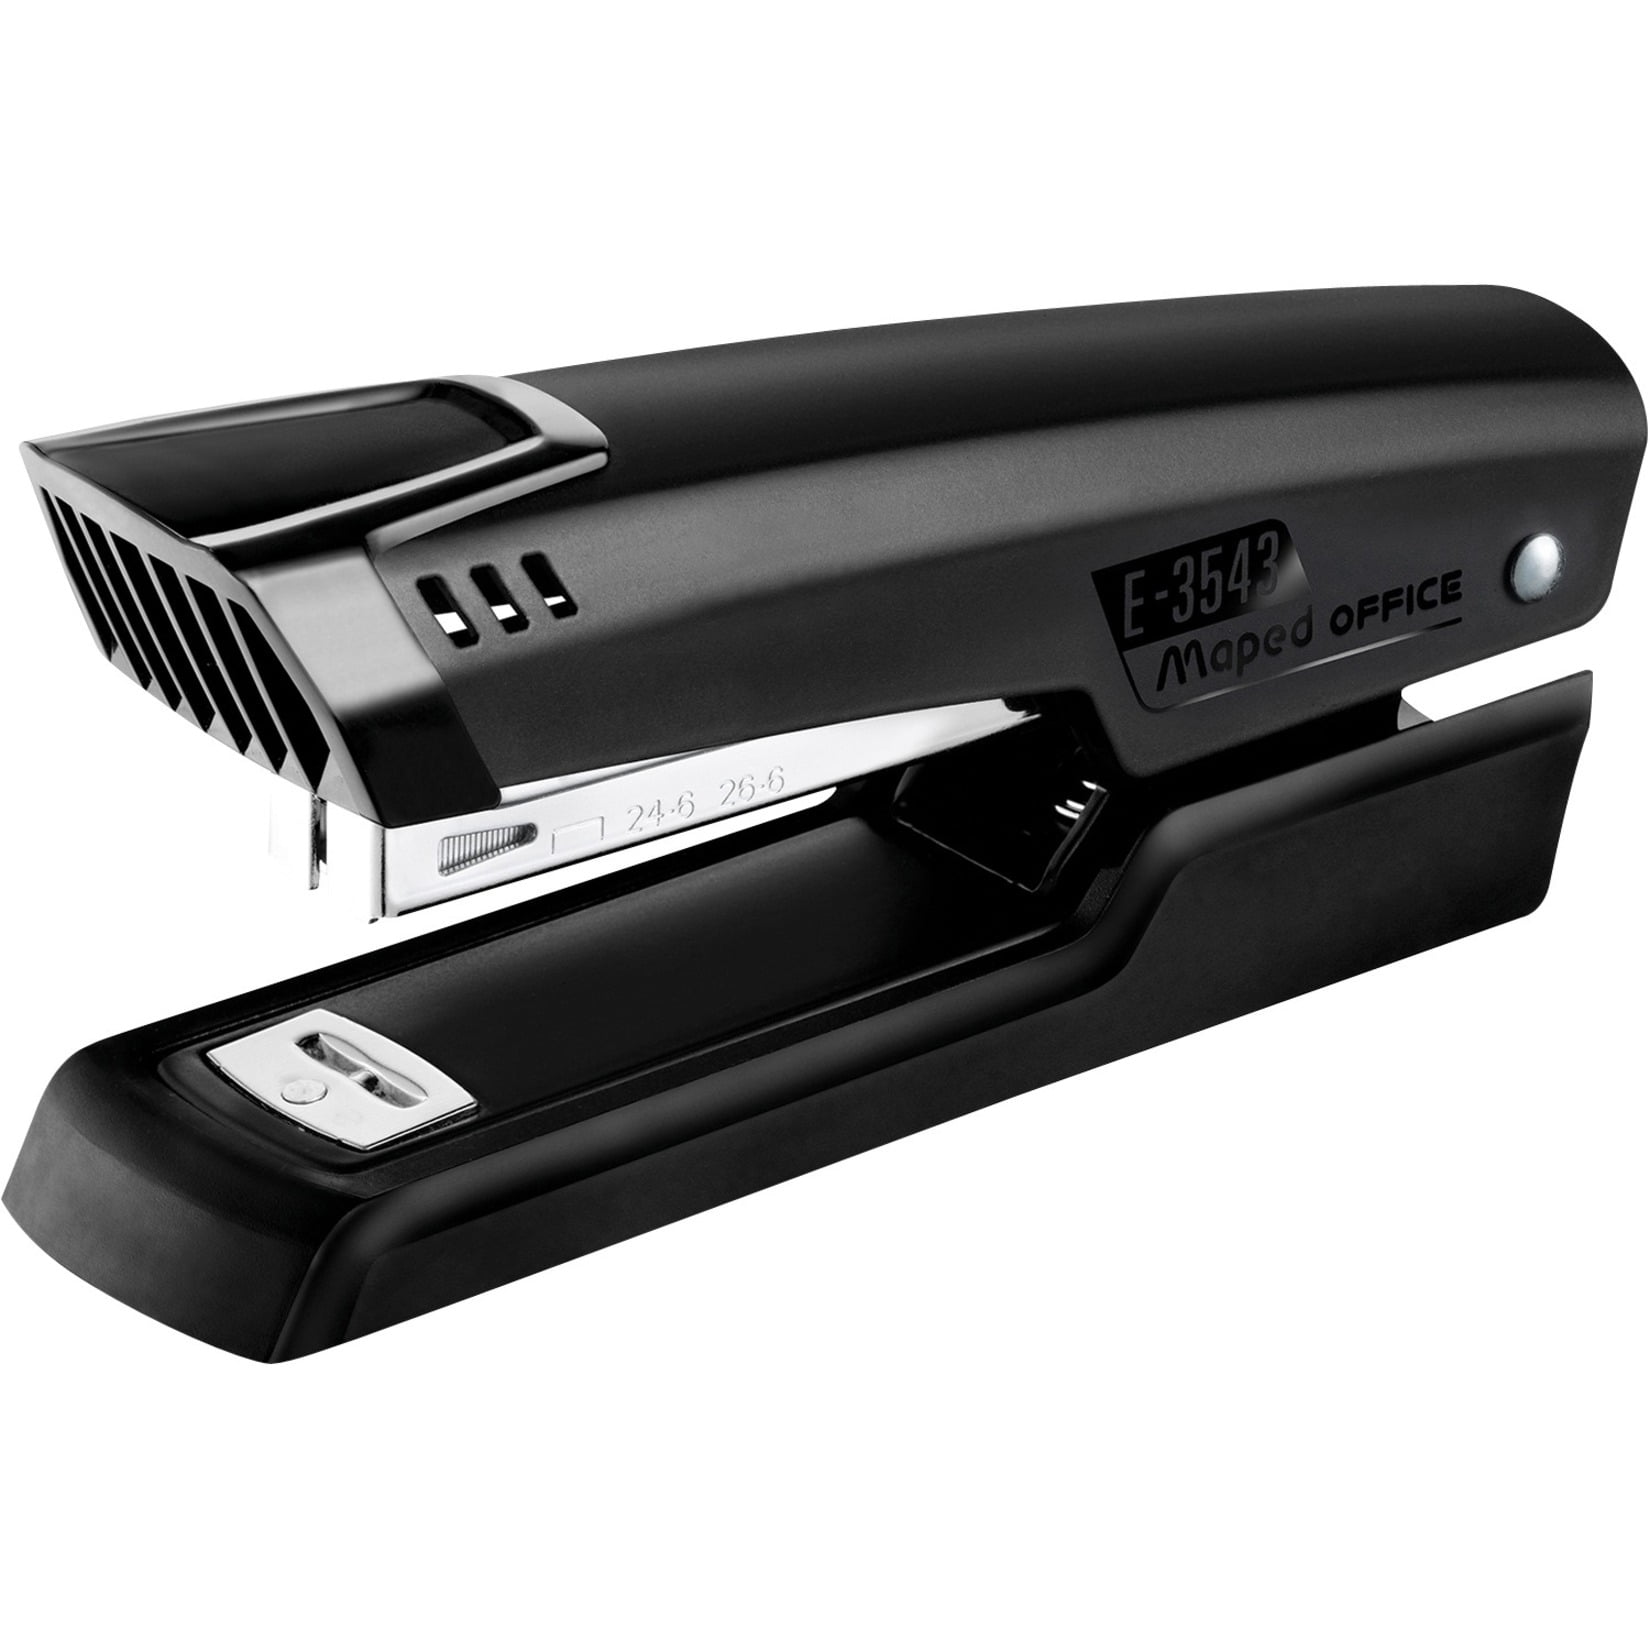 Portable Home Office Stapler Uses 24/6 and 26/6mm Staples 